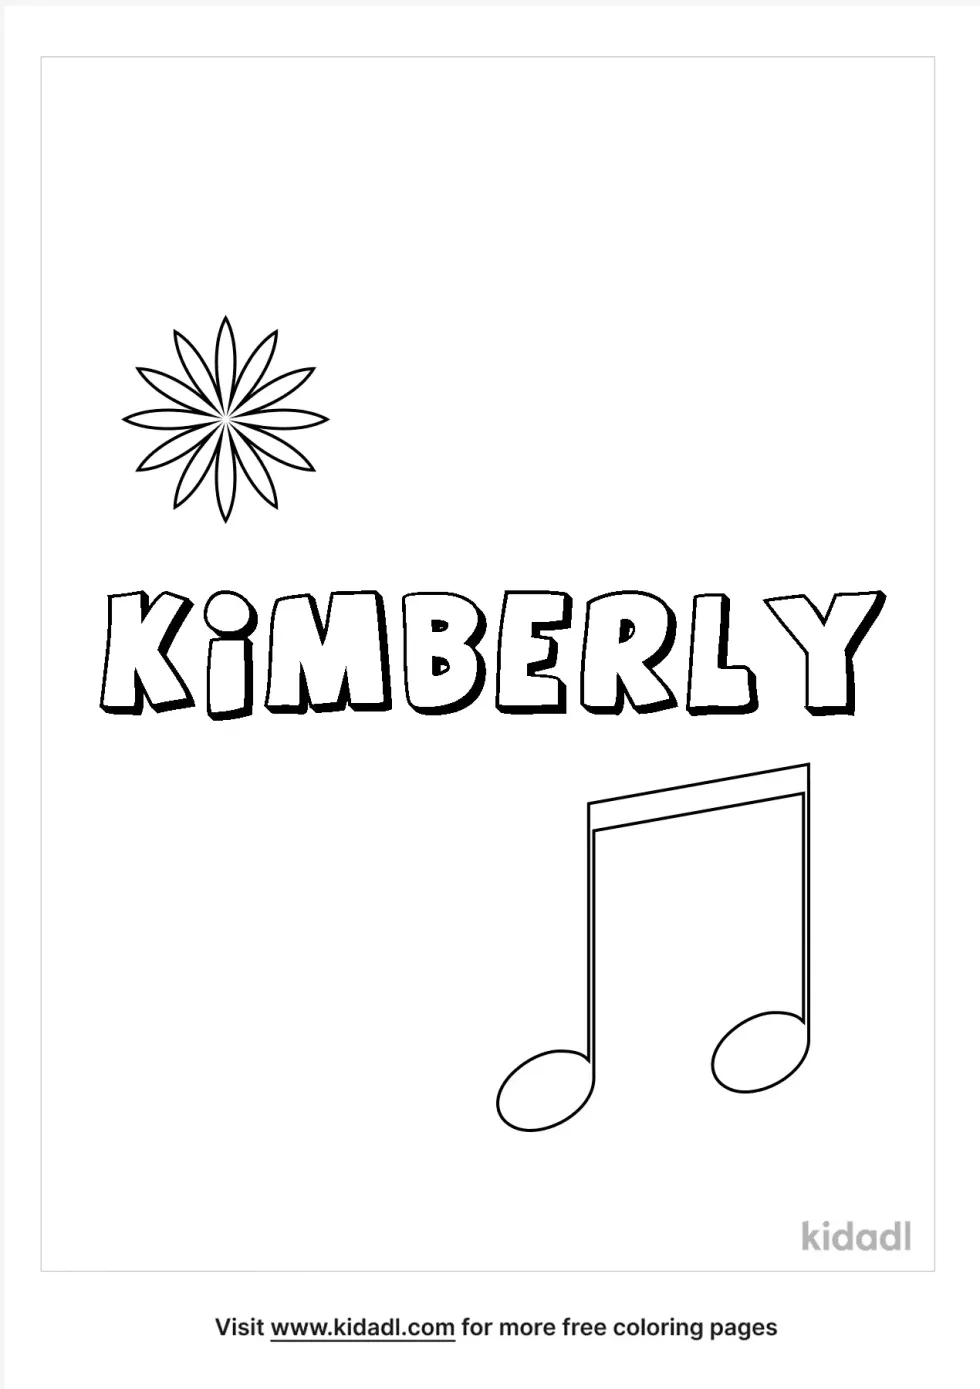 Kimberly Coloring Page